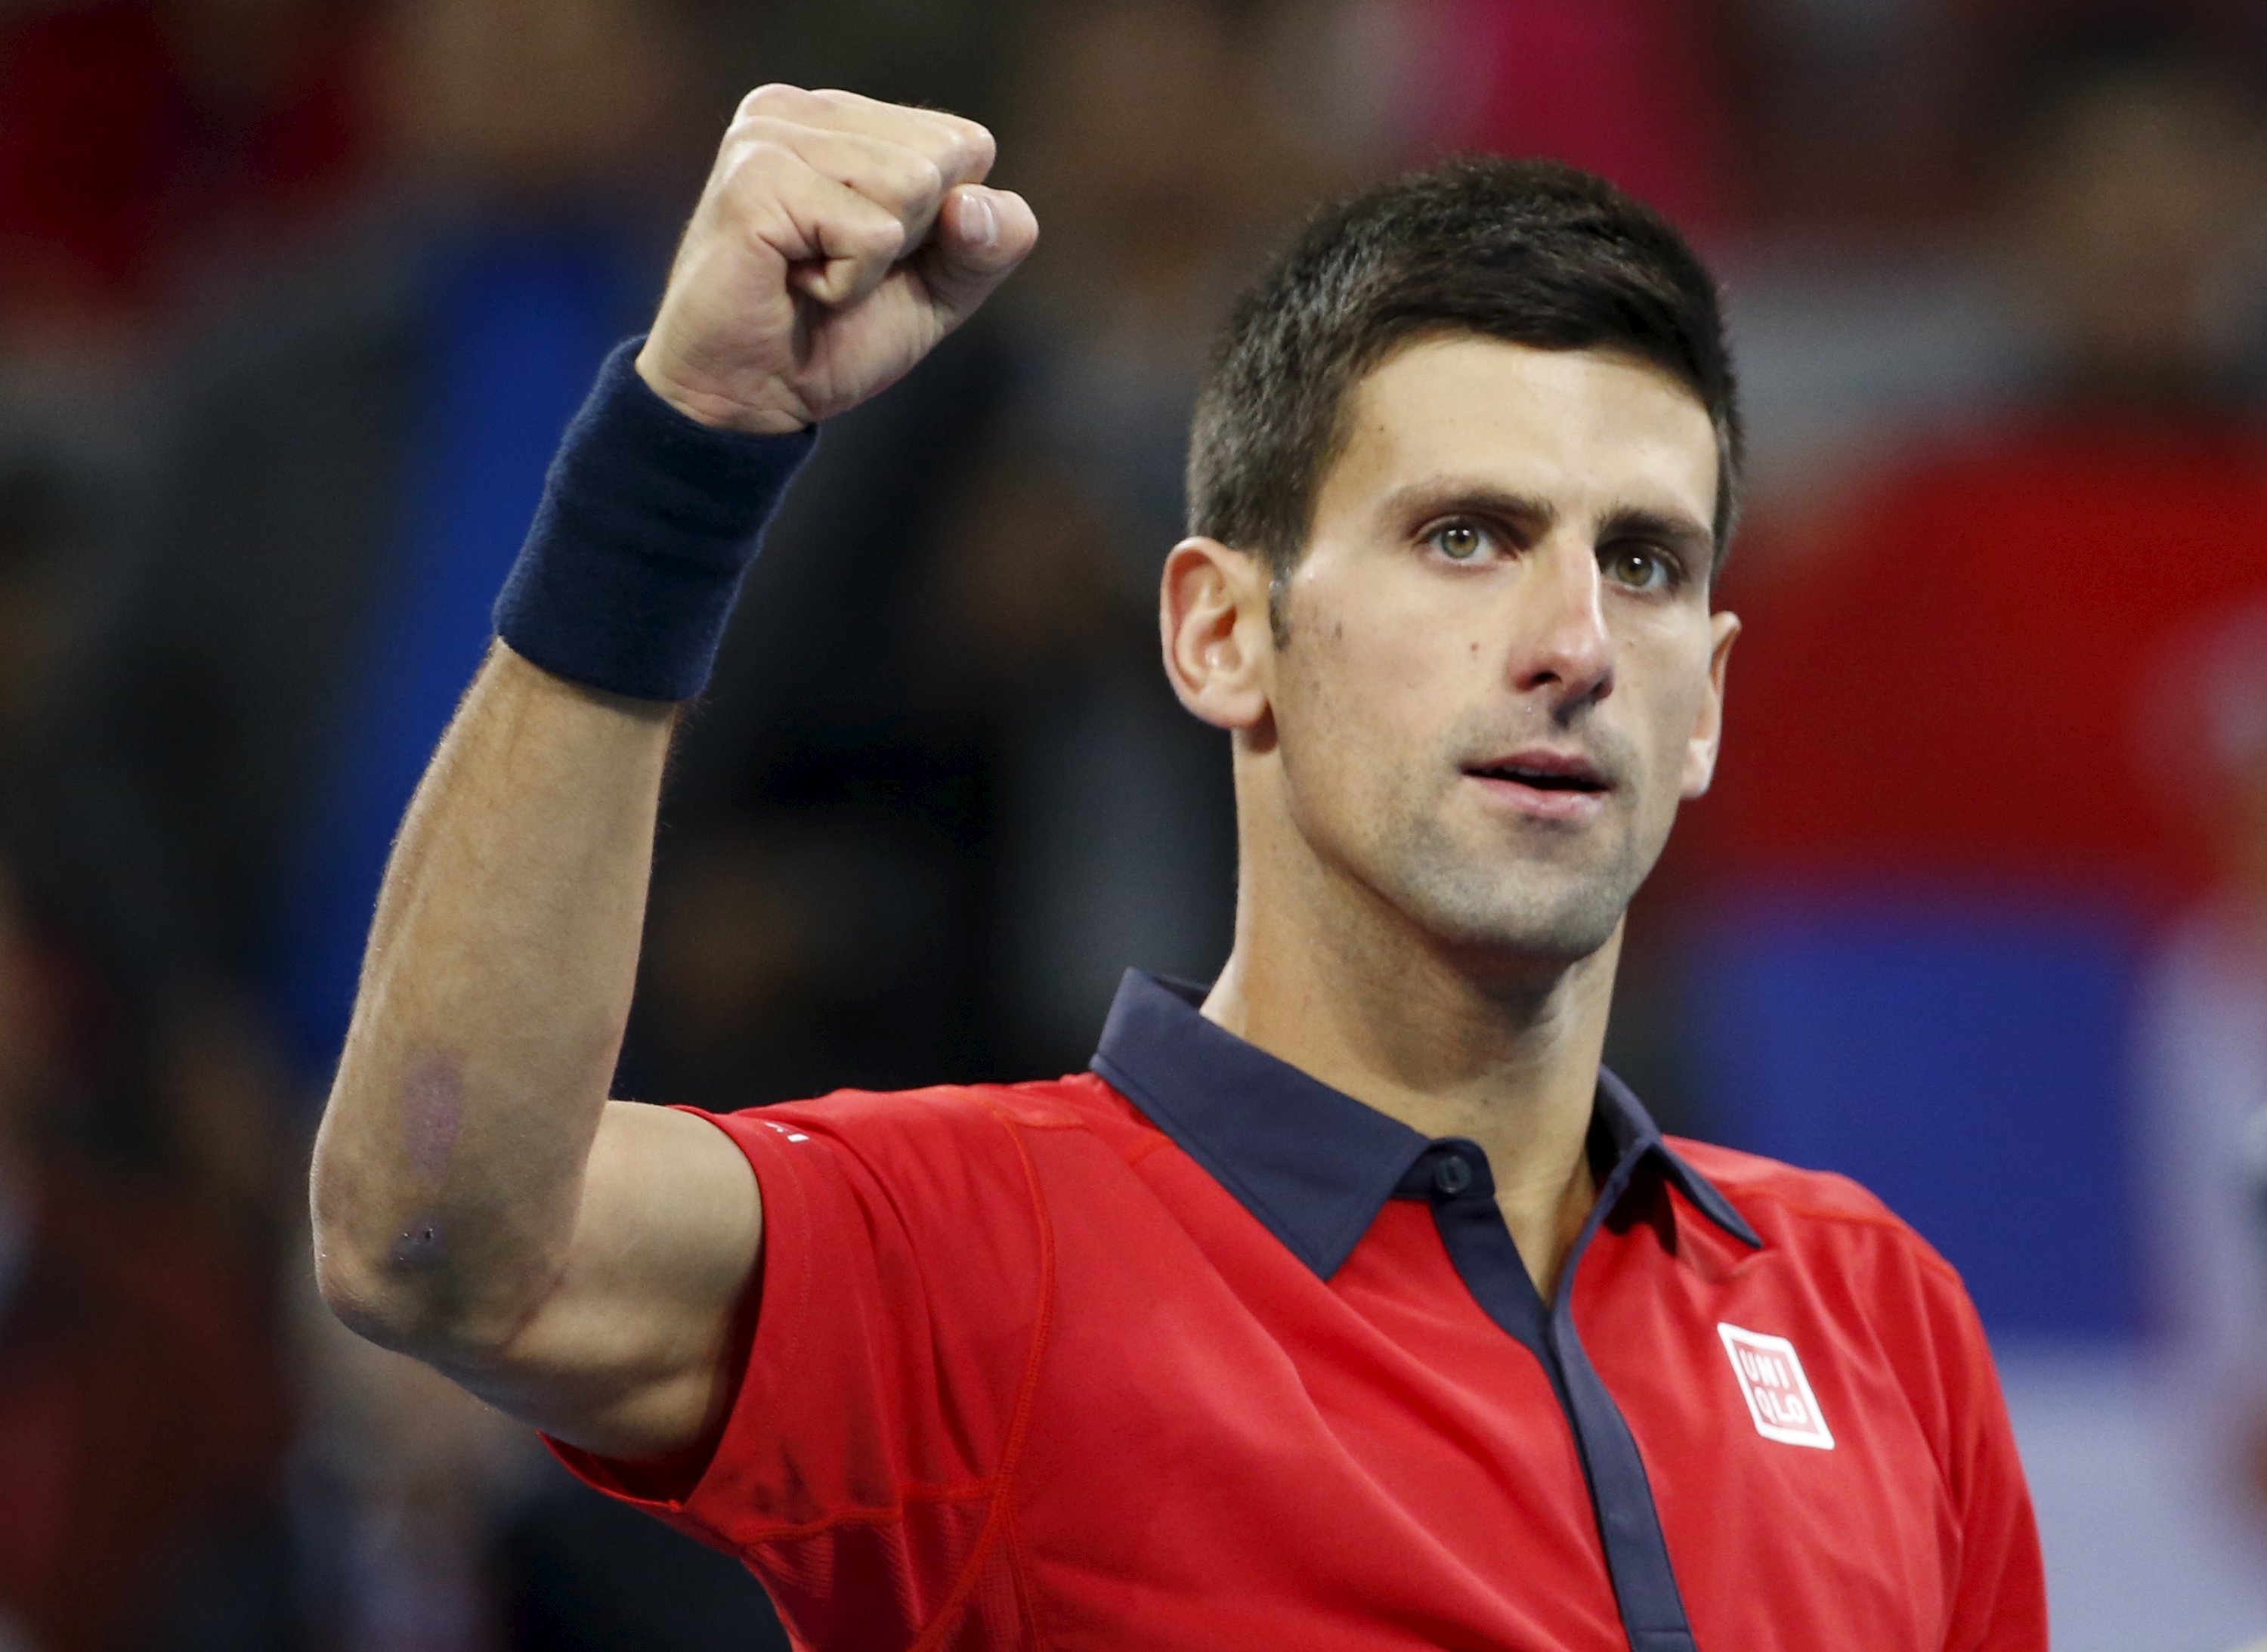 Novak Djokovic of Serbia reacts after beating John Isner of U.S. during their men's singles match at the China Open tennis tournament in Beijing, China, October 9, 2015.    REUTERS/Kim Kyung-Hoon